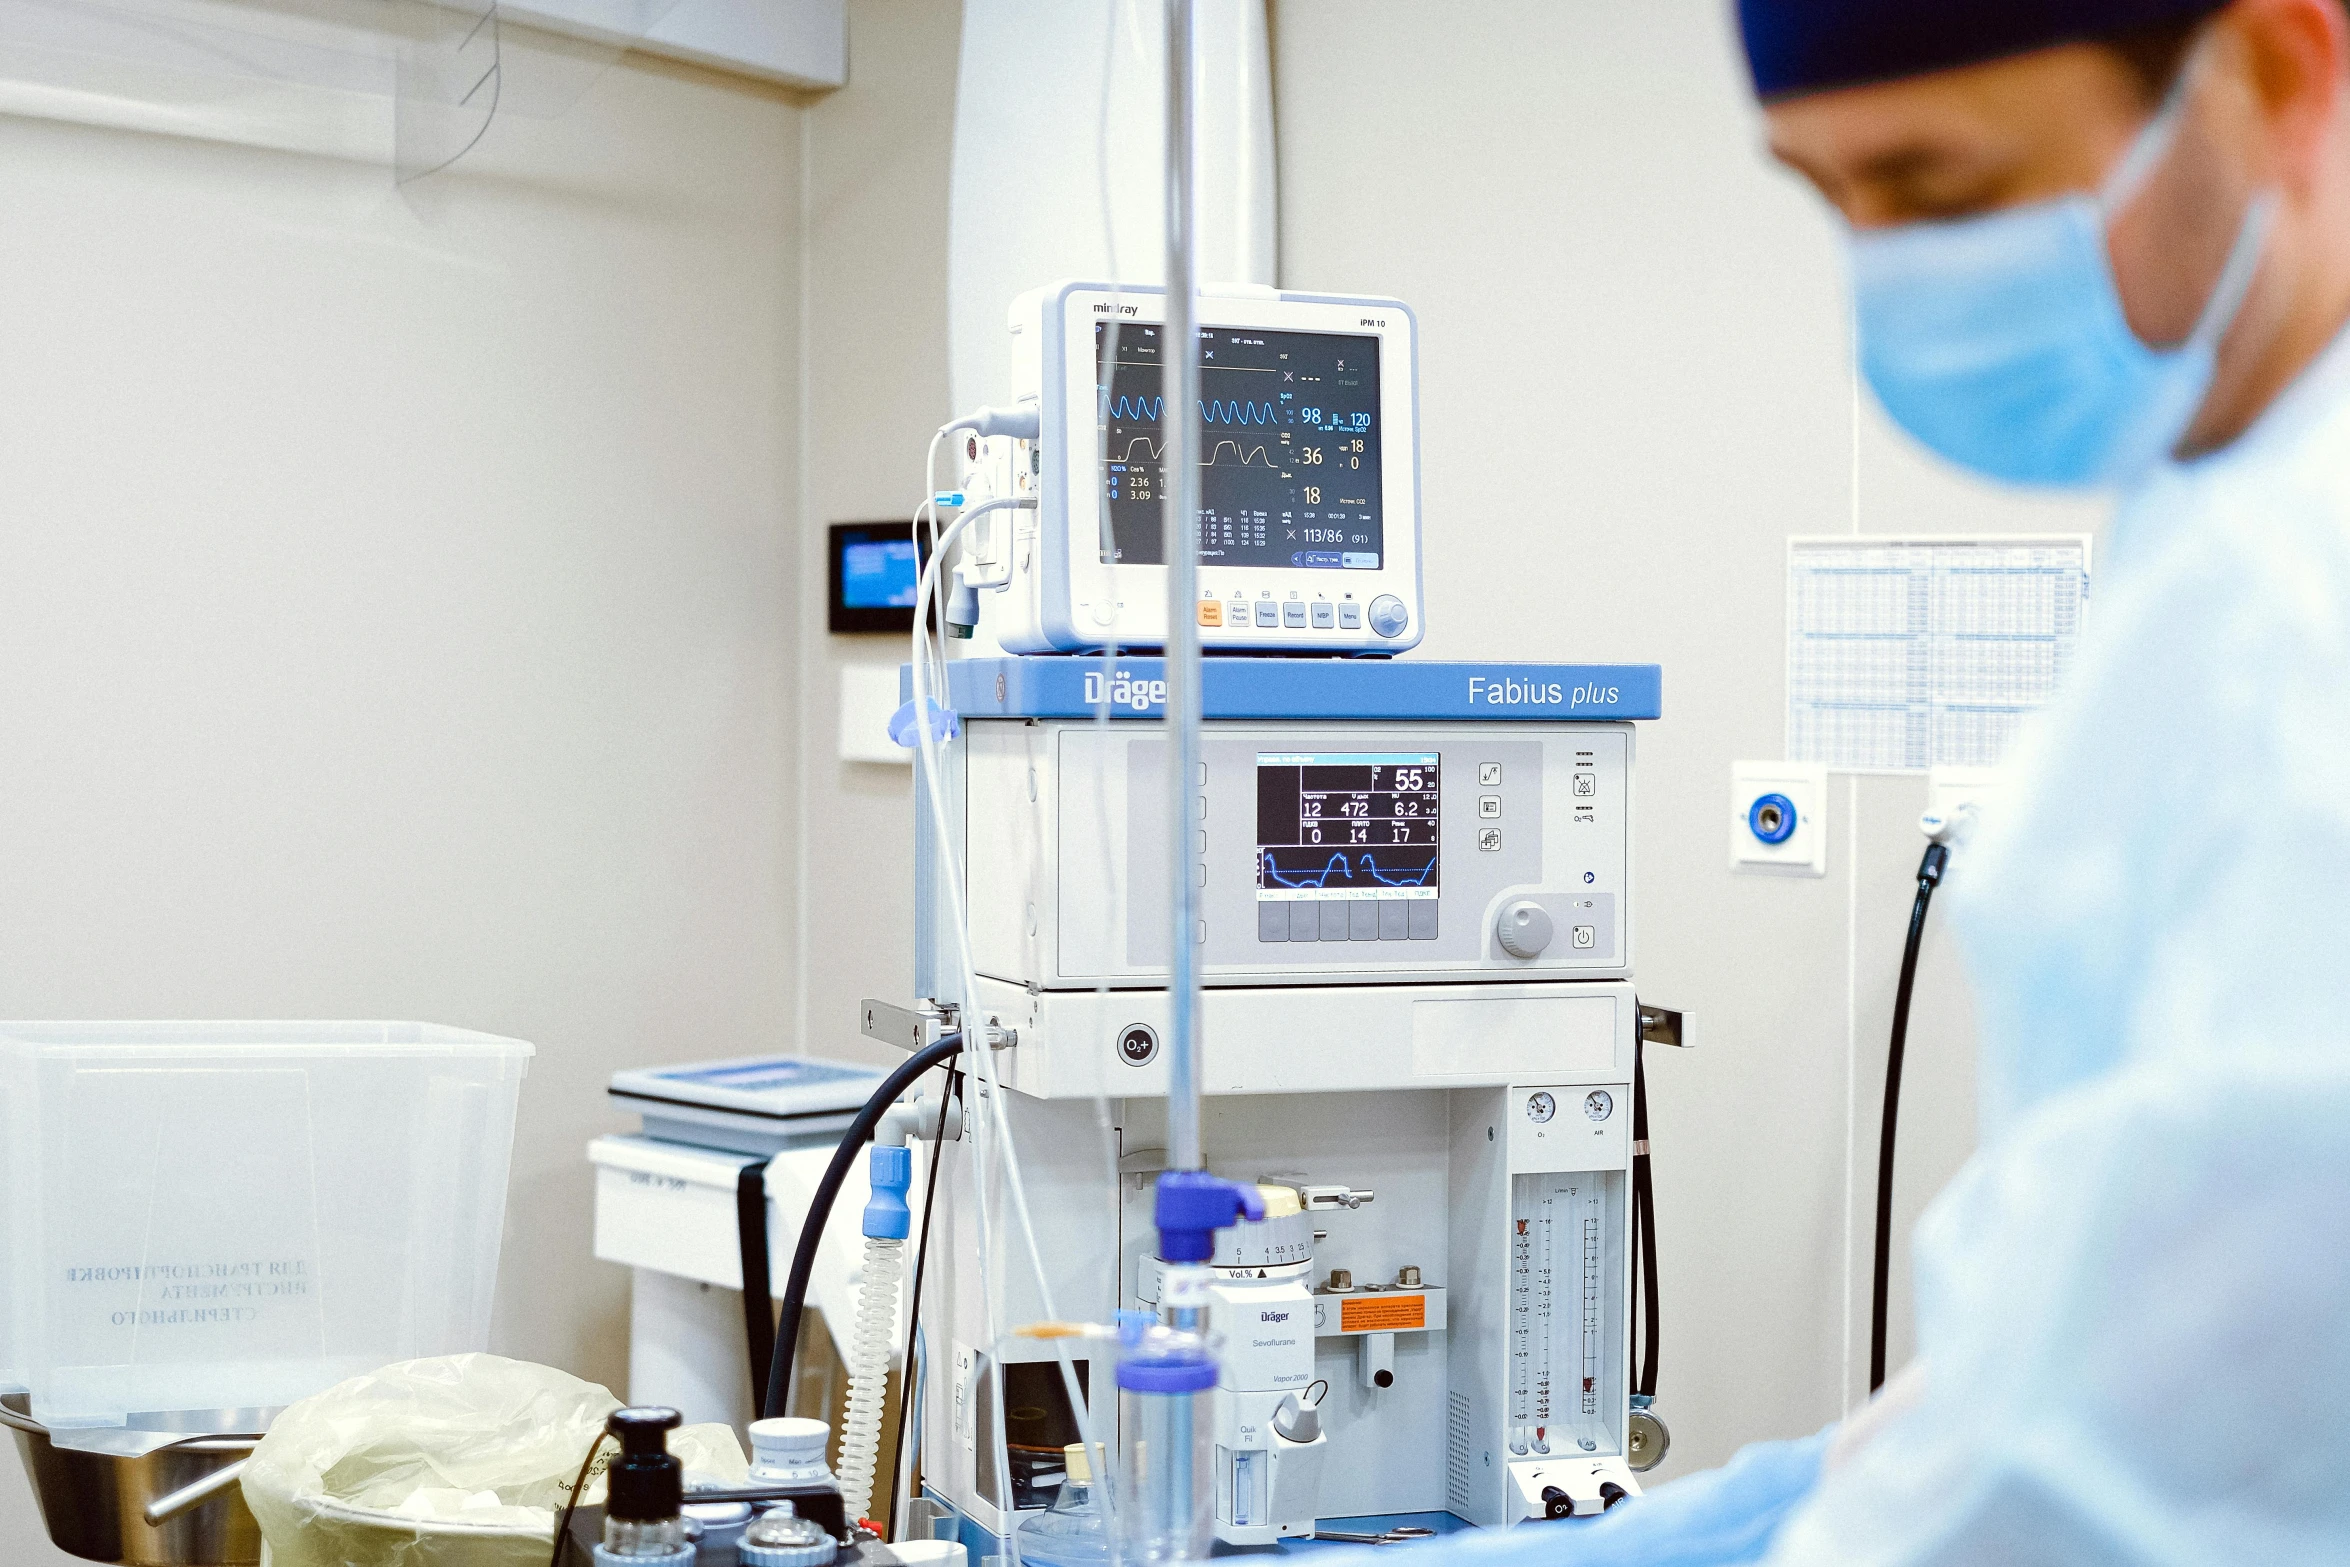 a close up of a person in a hospital room, scientific equipment, profile image, anaesthetic, engineering bay